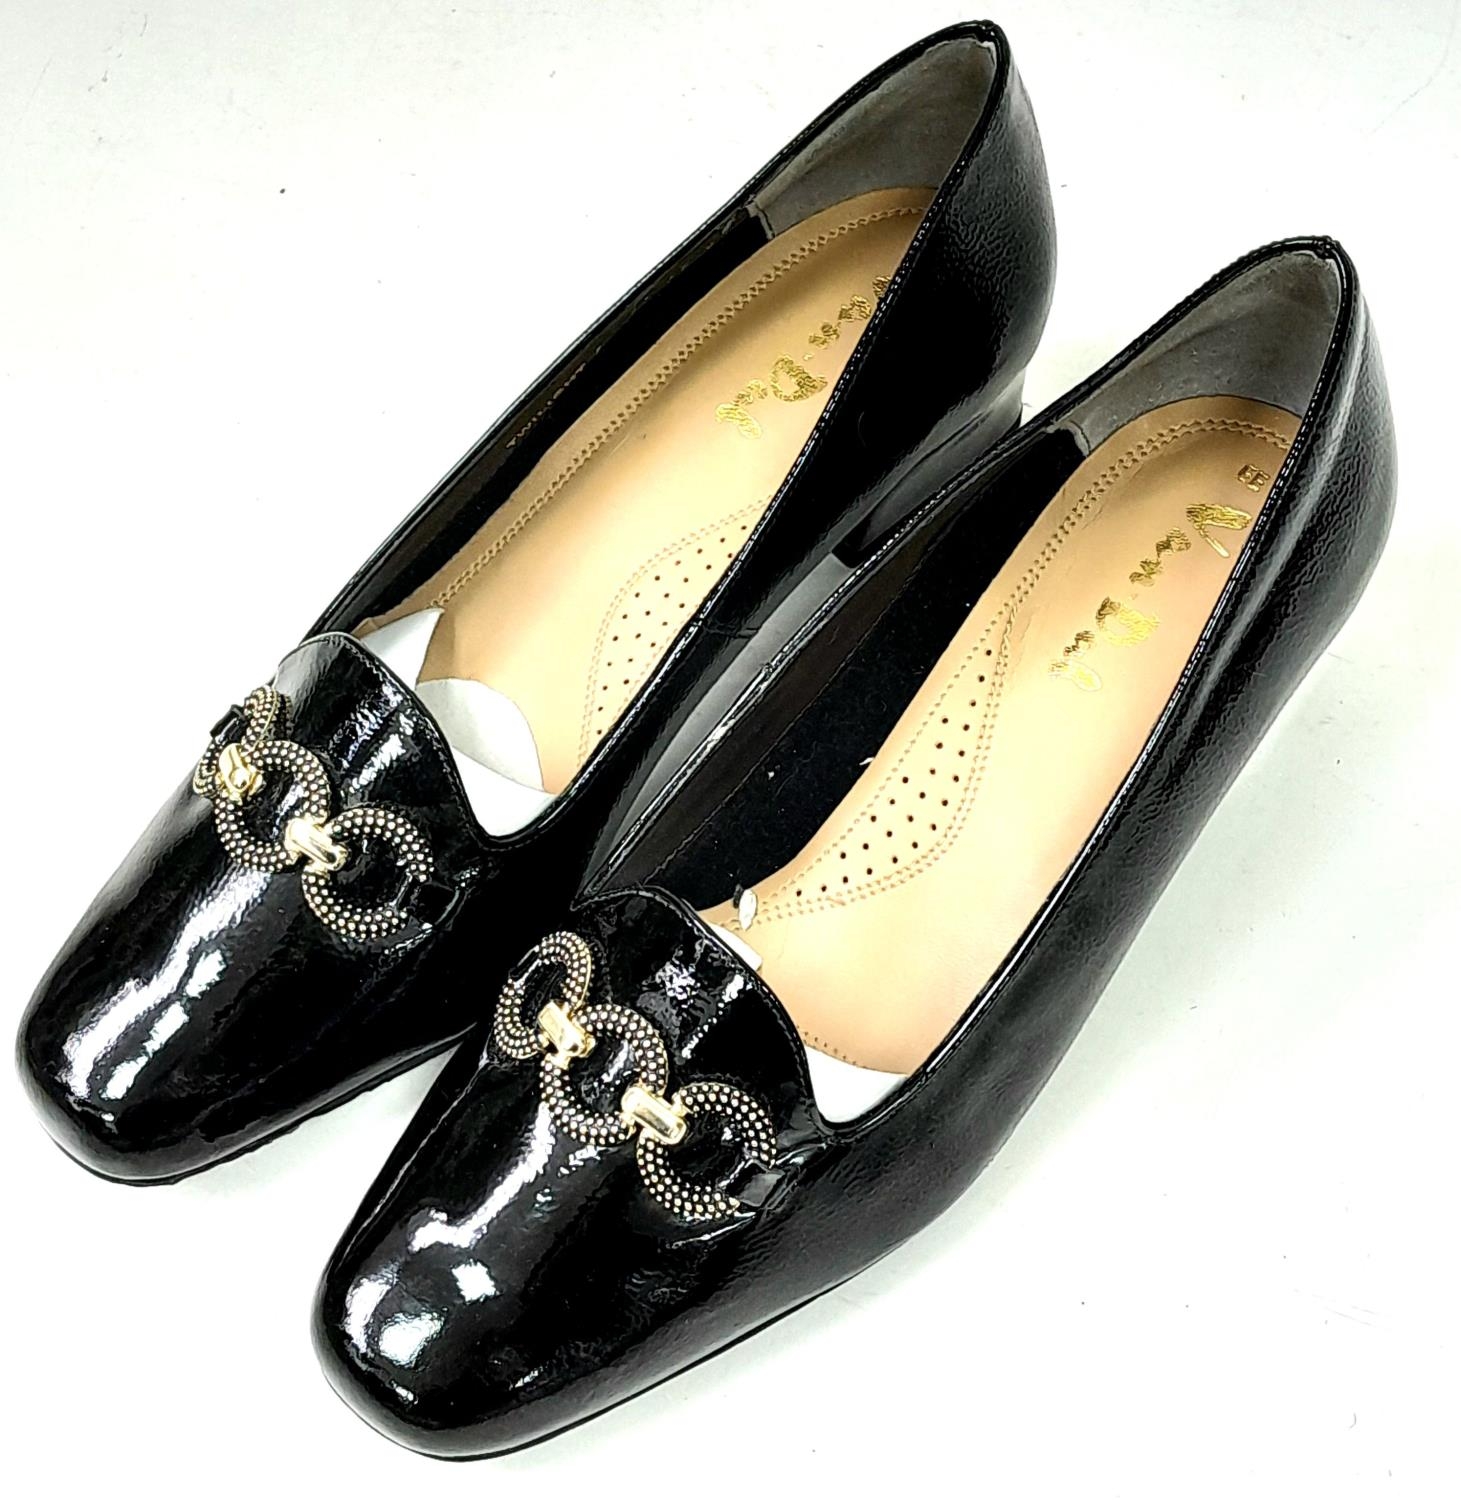 An Unused pair of "Twilight" lacquered ladies shoes by Van Dal, Size 5 ,1.5" heel. In box.